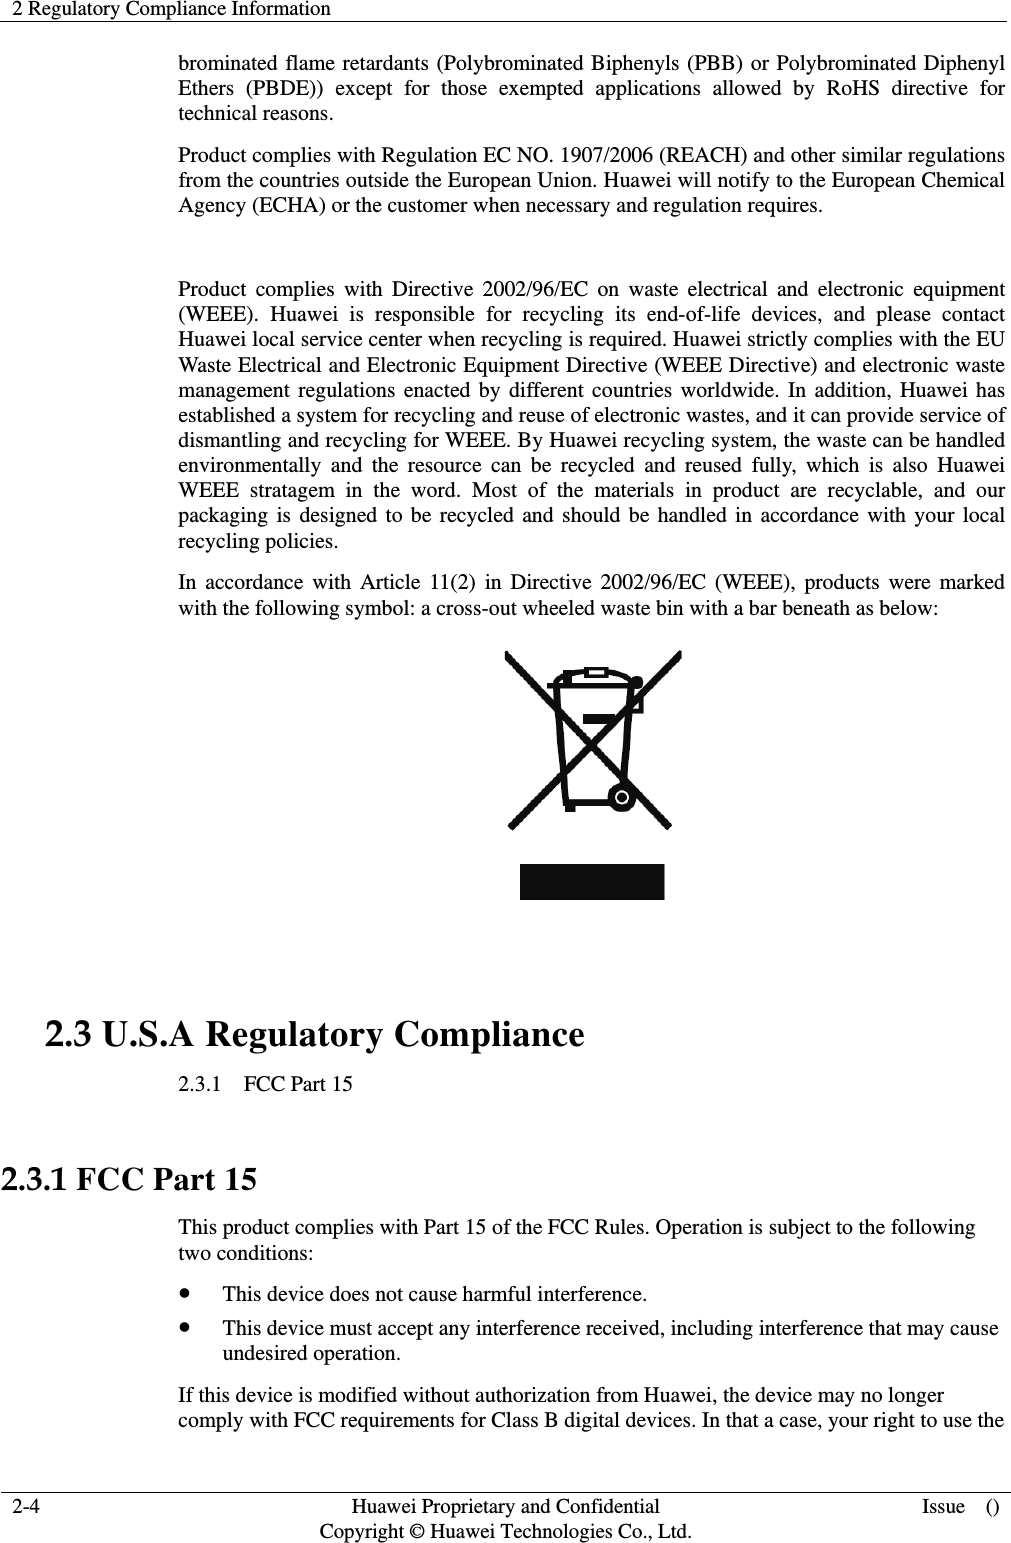 2 Regulatory Compliance Information   2-4  Huawei Proprietary and Confidential         Copyright © Huawei Technologies Co., Ltd. Issue  () brominated flame retardants (Polybrominated Biphenyls (PBB) or Polybrominated Diphenyl Ethers (PBDE)) except for those exempted applications allowed by RoHS directive for technical reasons.   Product complies with Regulation EC NO. 1907/2006 (REACH) and other similar regulations from the countries outside the European Union. Huawei will notify to the European Chemical Agency (ECHA) or the customer when necessary and regulation requires.  Product complies with Directive 2002/96/EC on waste electrical and electronic equipment (WEEE). Huawei is responsible for recycling its end-of-life devices, and please contact Huawei local service center when recycling is required. Huawei strictly complies with the EU Waste Electrical and Electronic Equipment Directive (WEEE Directive) and electronic waste management regulations enacted by different countries worldwide. In addition, Huawei has established a system for recycling and reuse of electronic wastes, and it can provide service of dismantling and recycling for WEEE. By Huawei recycling system, the waste can be handled environmentally and the resource can be recycled and reused fully, which is also Huawei WEEE stratagem in the word. Most of the materials in product are recyclable, and our packaging is designed to be recycled and should be handled in accordance with your local recycling policies.   In accordance with Article 11(2) in Directive 2002/96/EC (WEEE), products were marked with the following symbol: a cross-out wheeled waste bin with a bar beneath as below:   2.3 U.S.A Regulatory Compliance 2.3.1  FCC Part 15  2.3.1 FCC Part 15 This product complies with Part 15 of the FCC Rules. Operation is subject to the following two conditions: z This device does not cause harmful interference. z This device must accept any interference received, including interference that may cause undesired operation. If this device is modified without authorization from Huawei, the device may no longer comply with FCC requirements for Class B digital devices. In that a case, your right to use the 